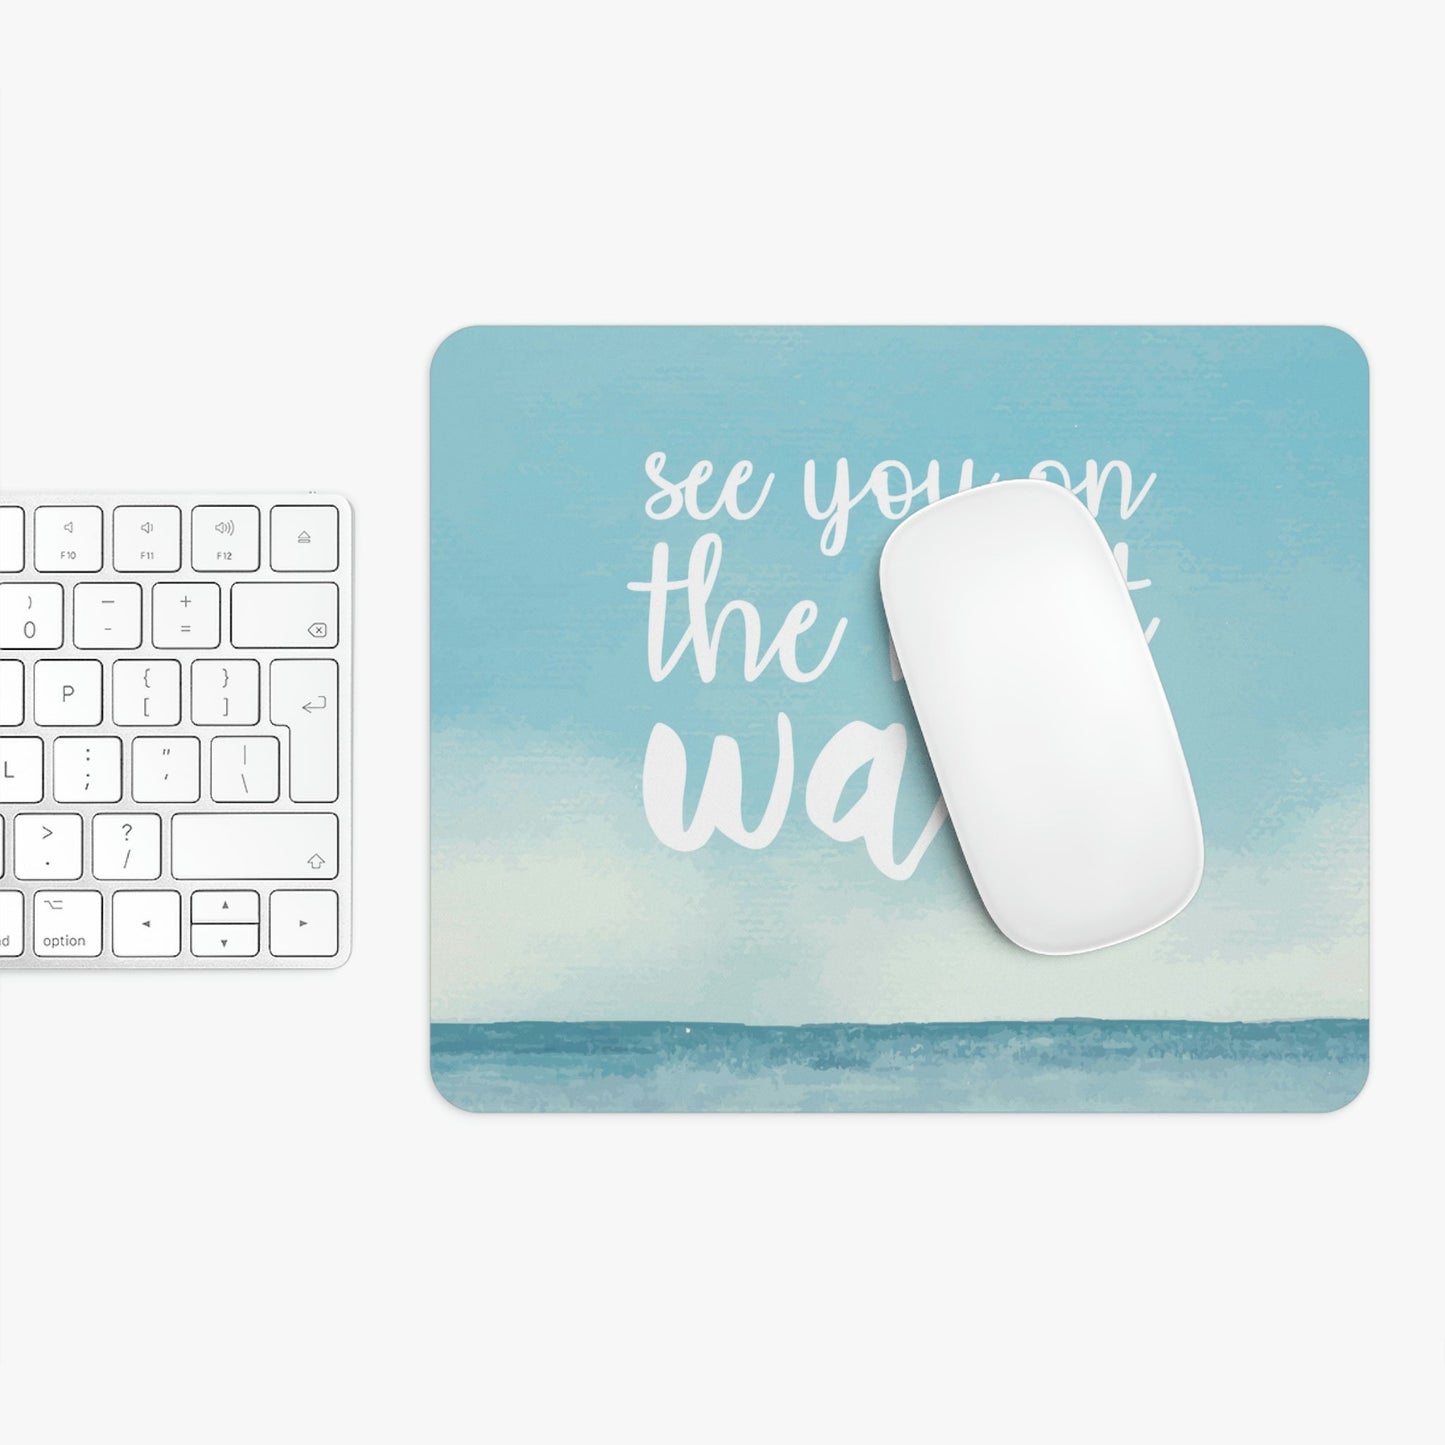 See You On the Next Wave Surfers Slogan Ergonomic Non-slip Creative Design Mouse Pad Ichaku [Perfect Gifts Selection]